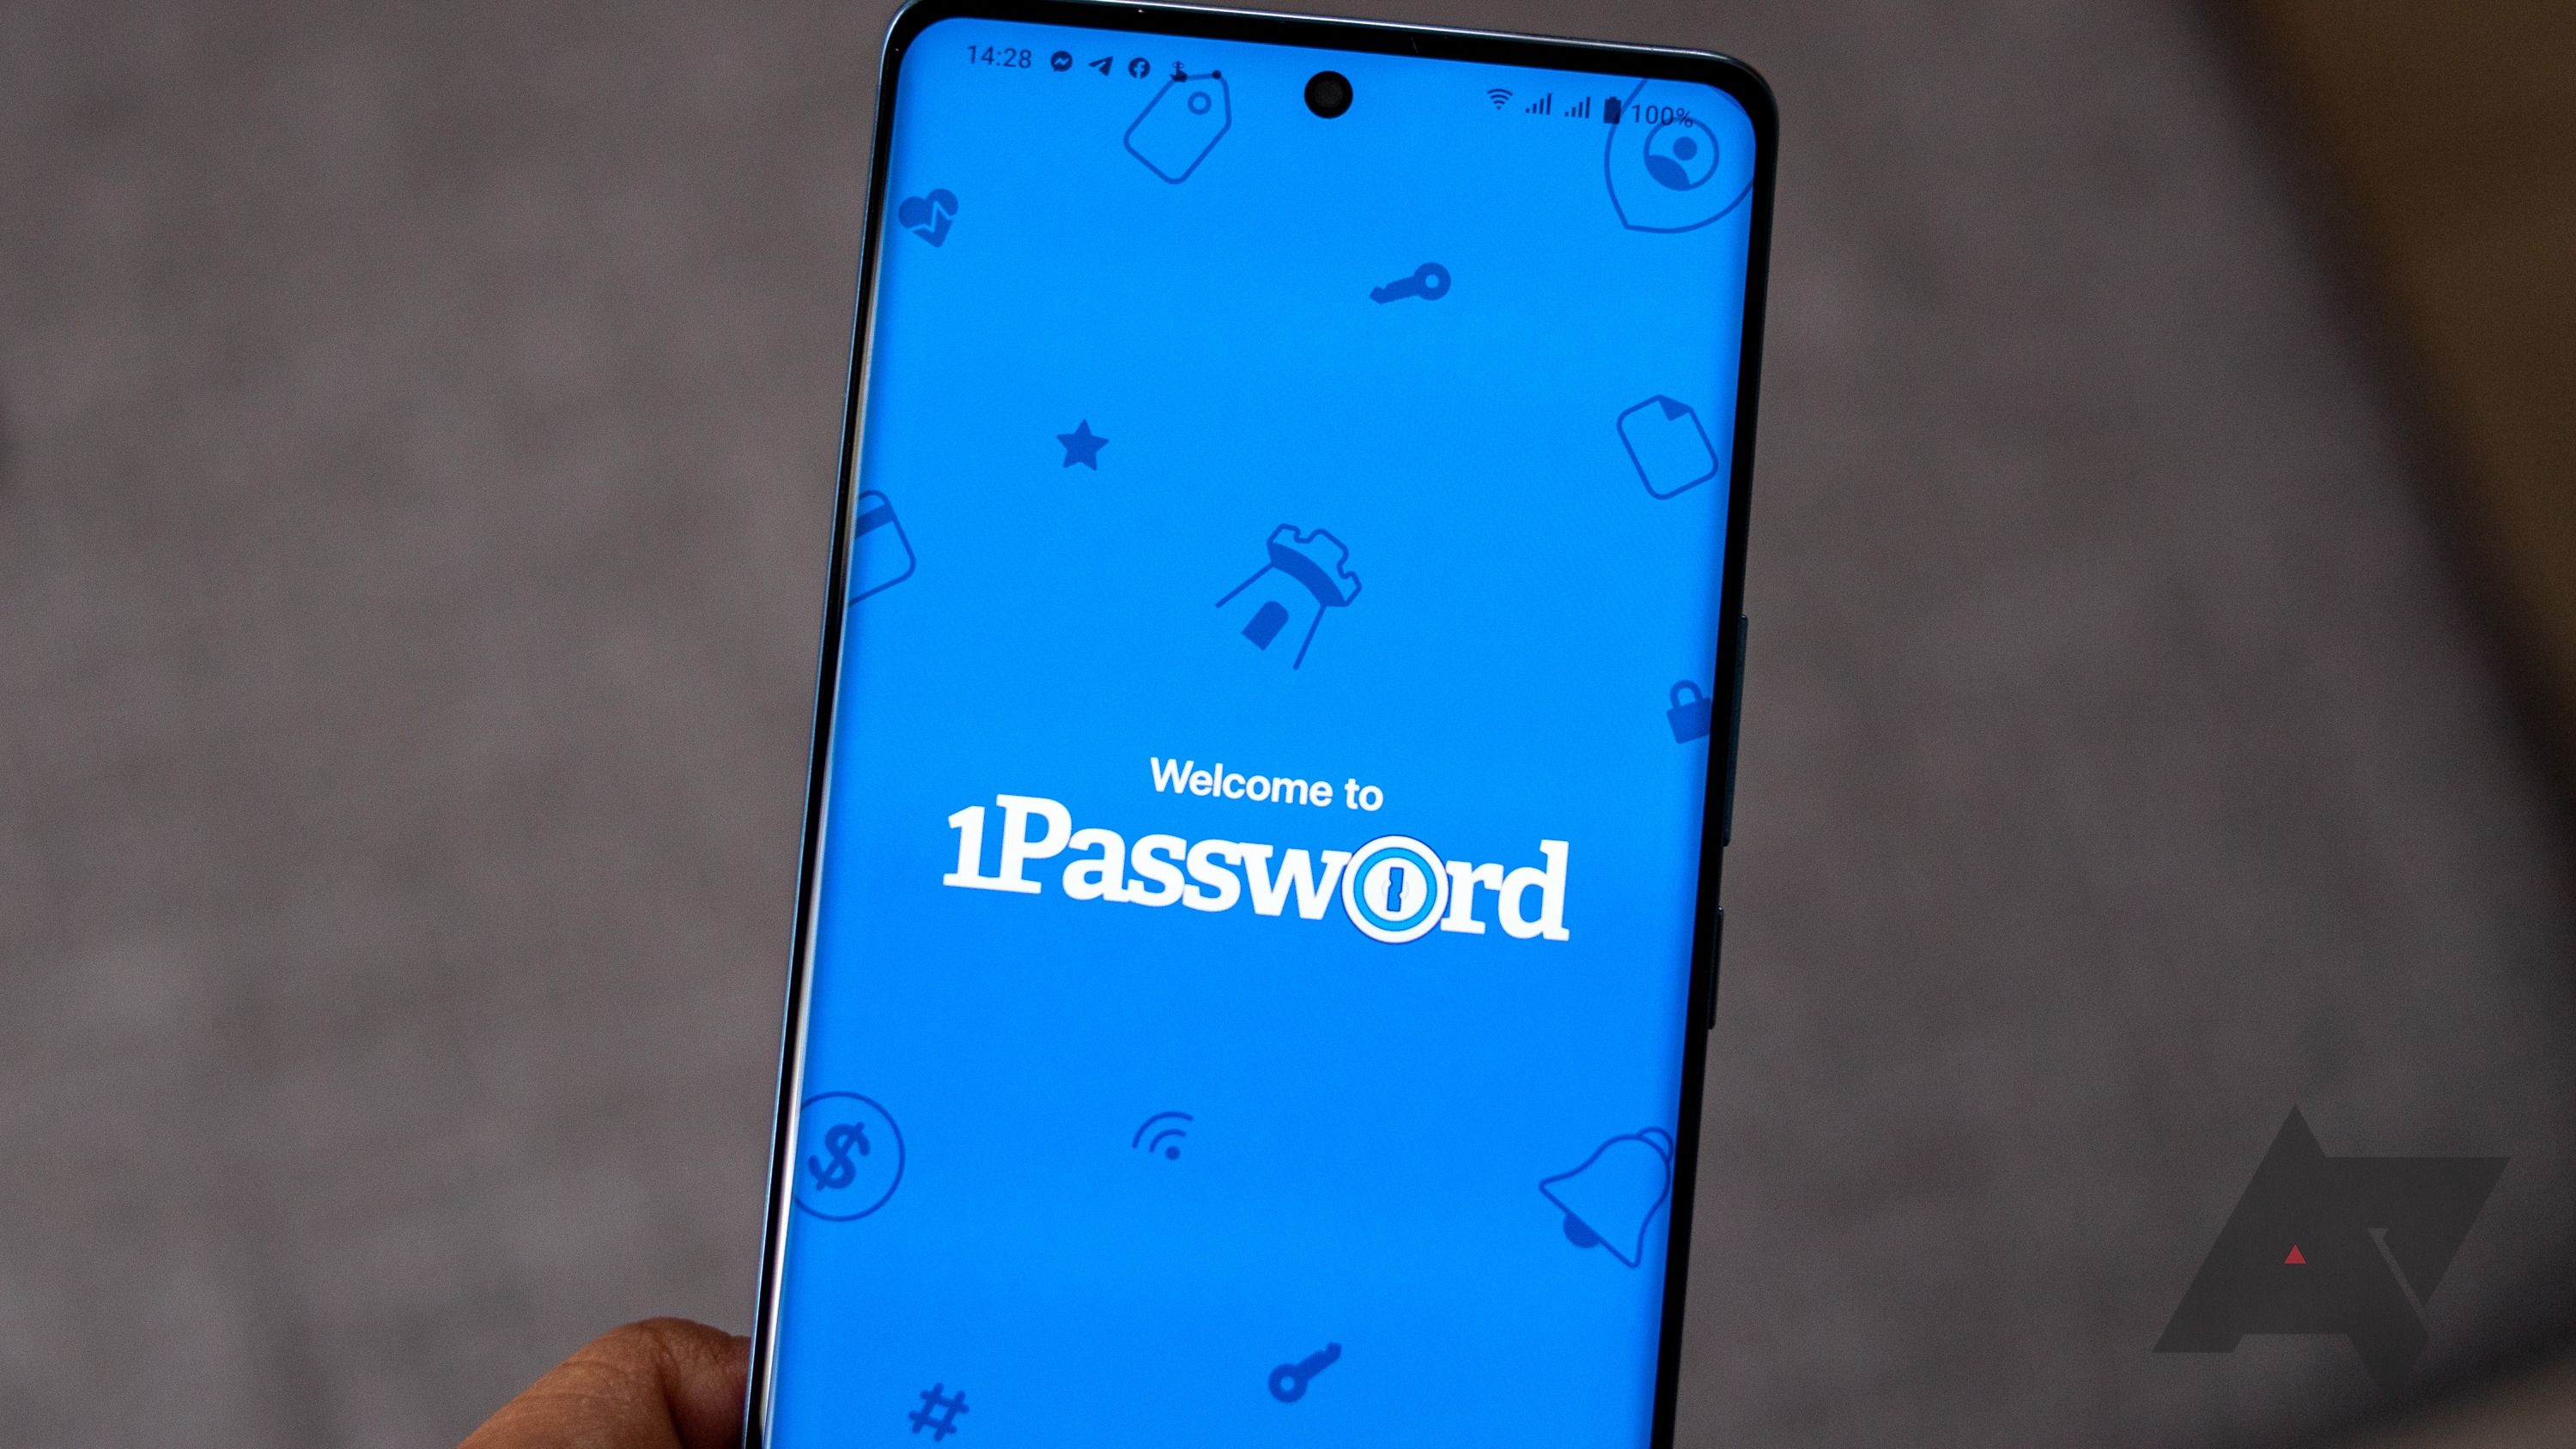 1Password logo on the welcome screen